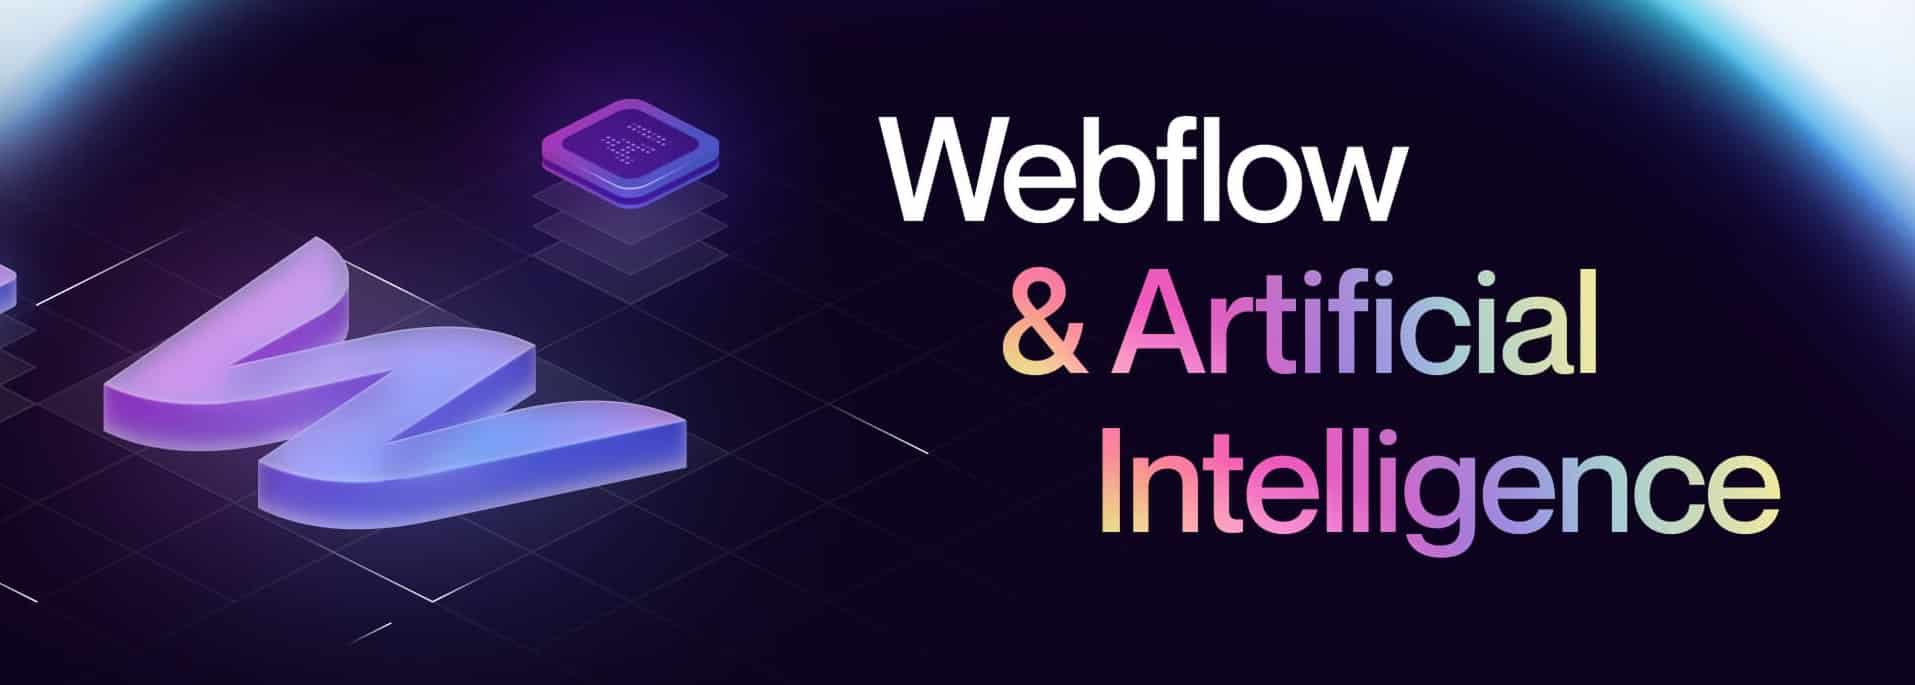 Webflow&AI feature launch page preview